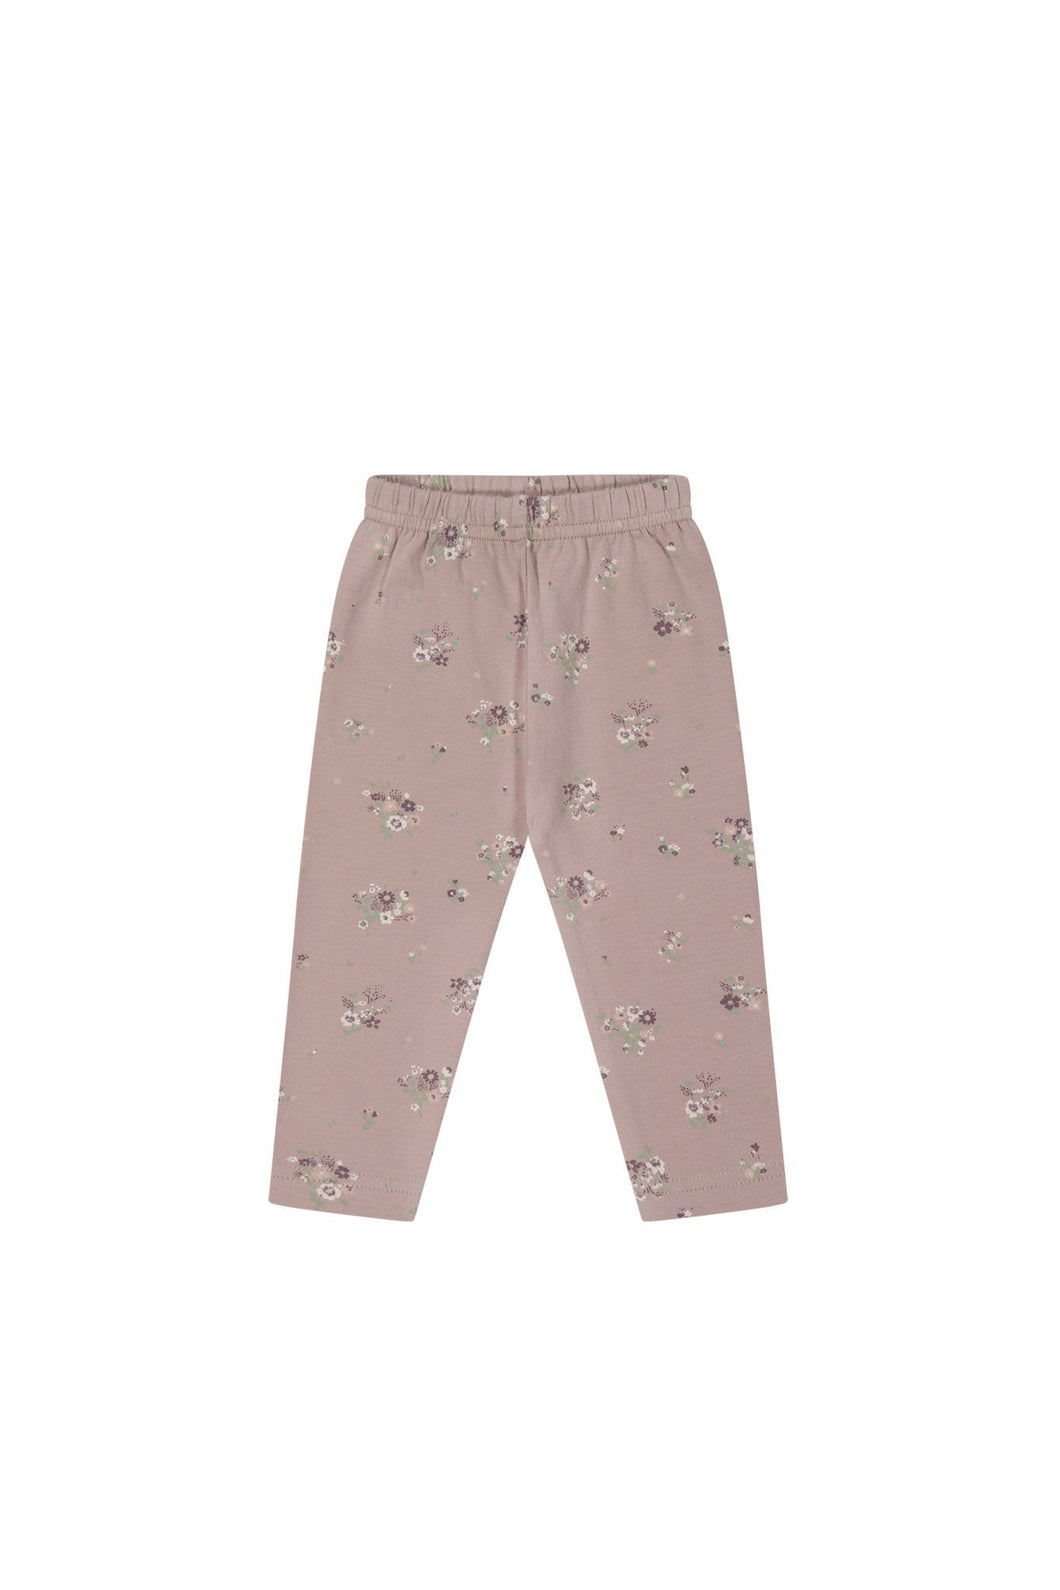 Mauve leggings with a floral pattern. 